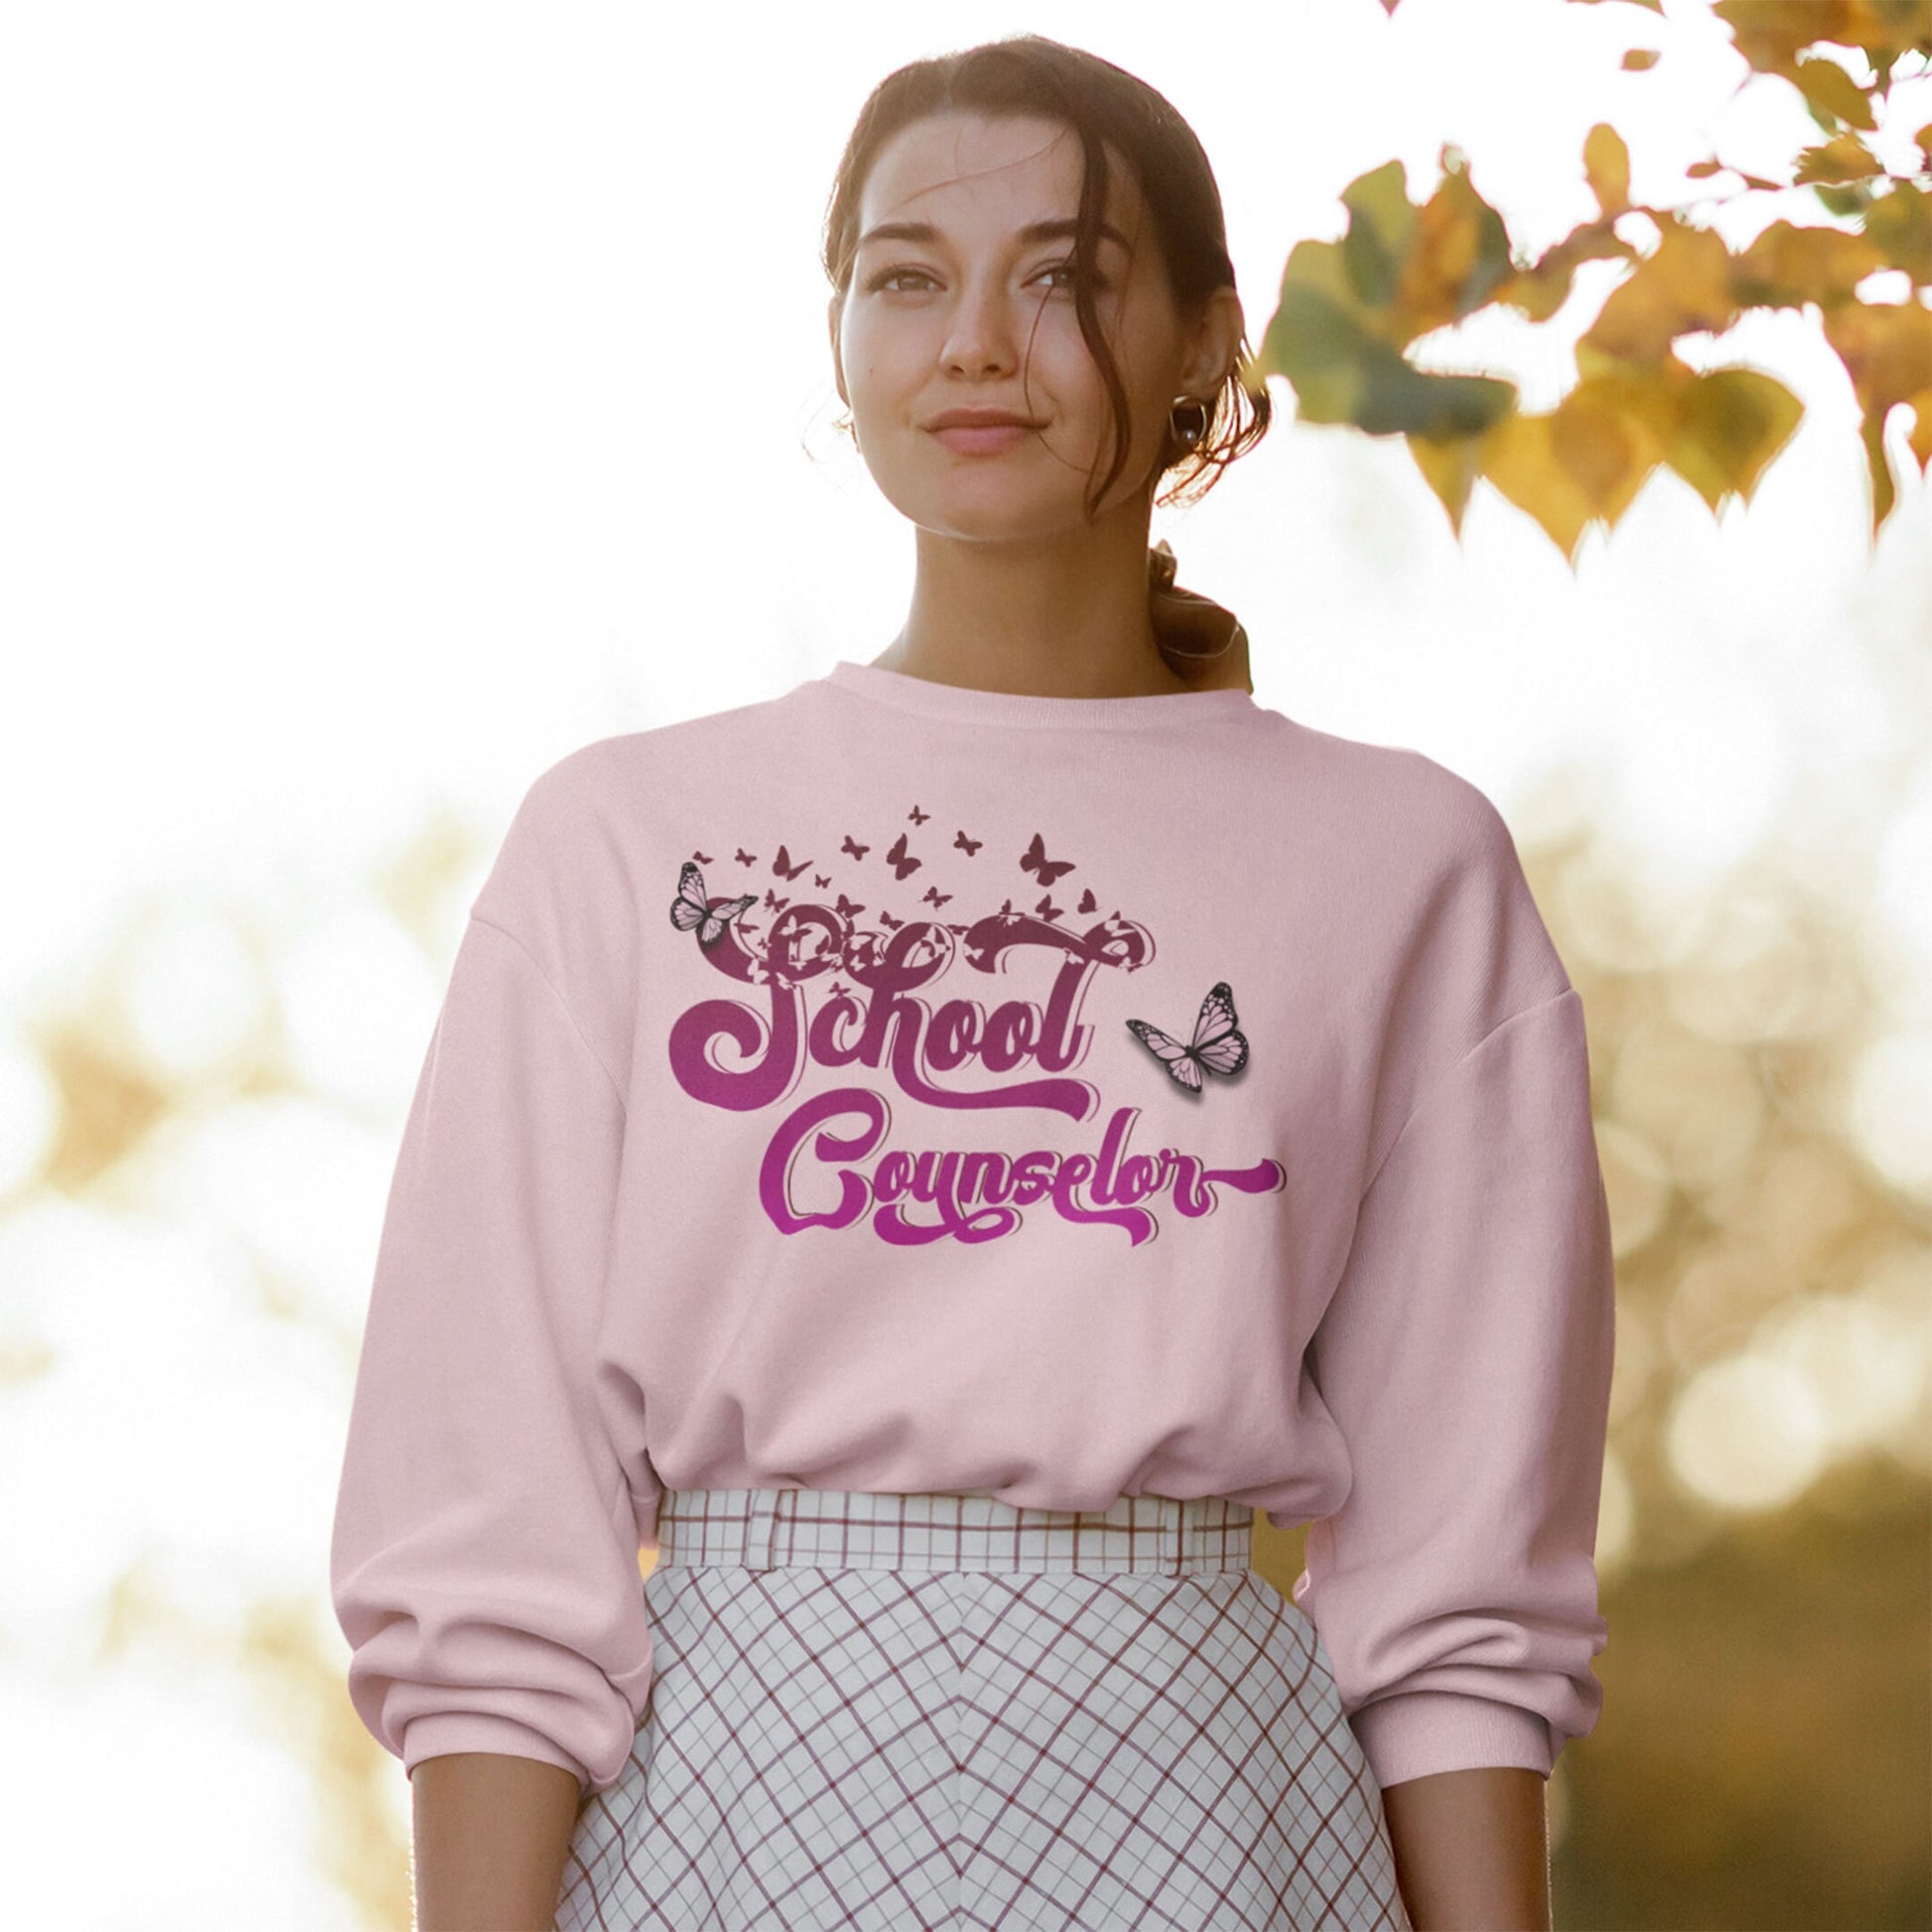 School Counselor Sweatshirt, Counselor Flower Floral Butterfly, Admin Counseling Office, School Counselor Sweater Gift, Administrative Staff